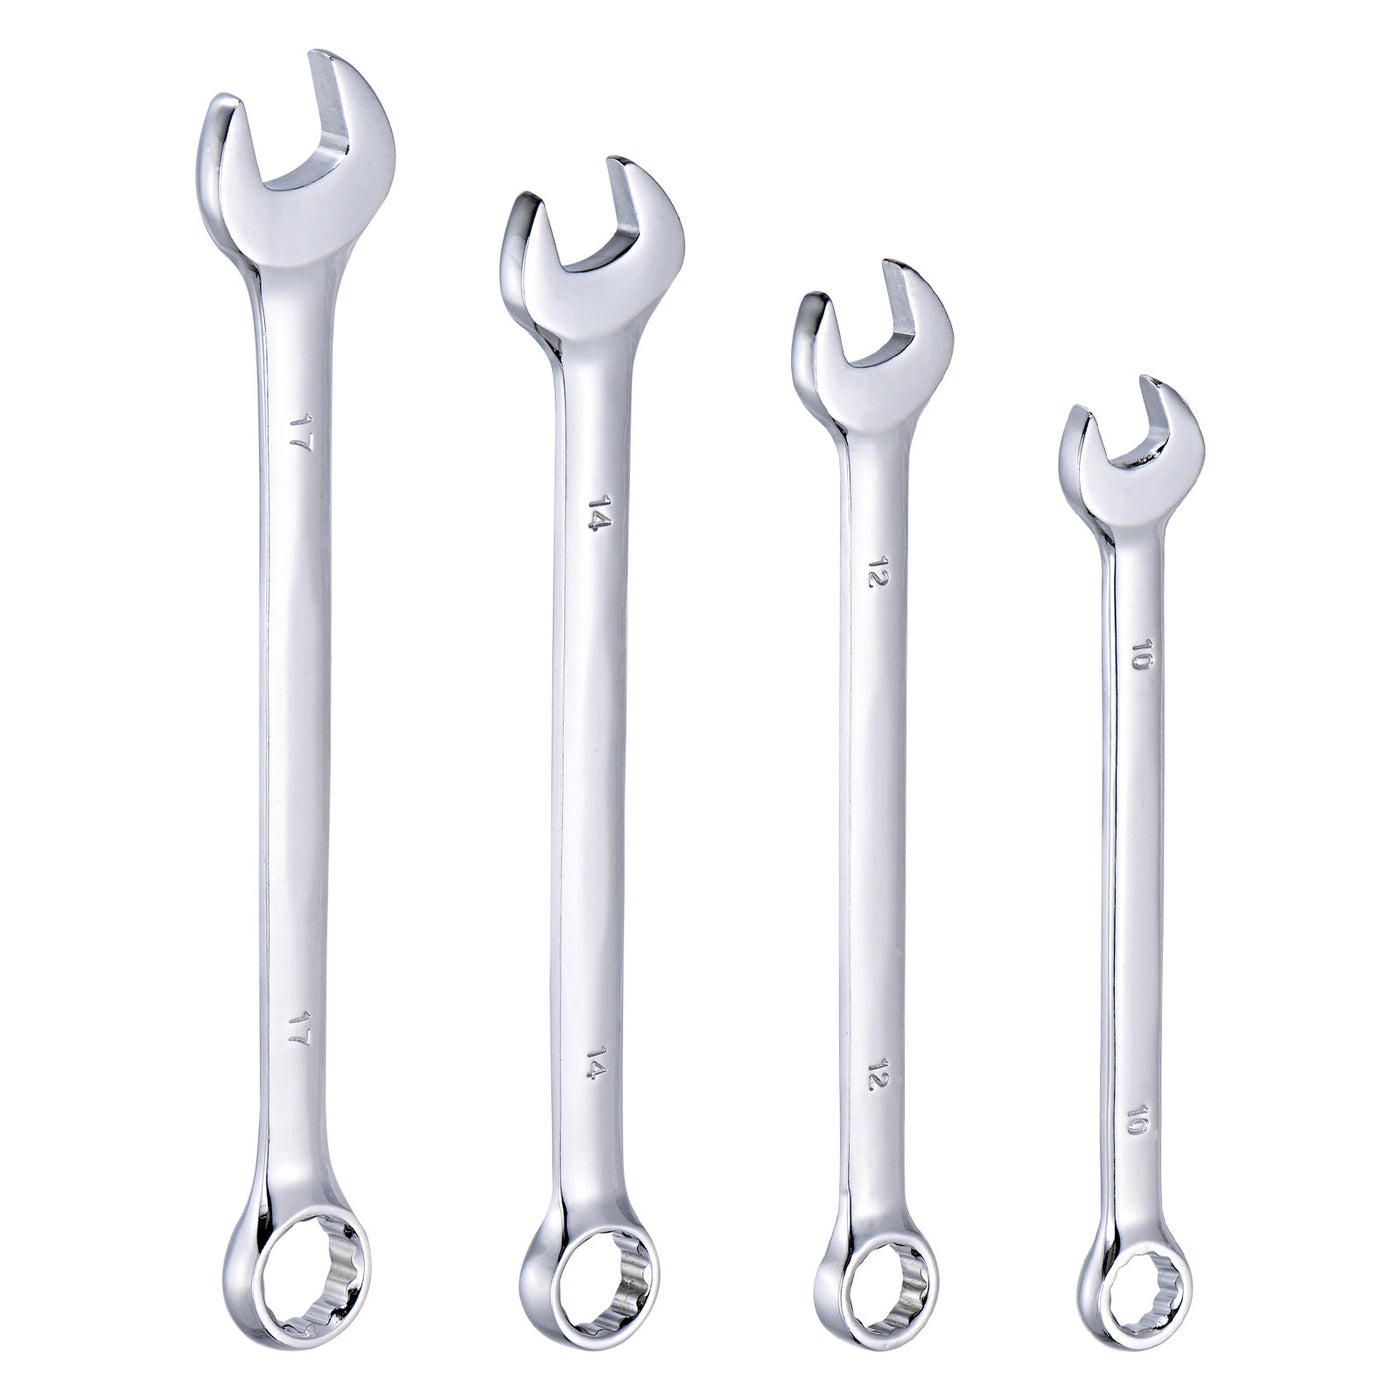 uxcell Uxcell Combination Wrench Set, 10-17mm Open End and Box End with Rolling Pouch, 4-Piece